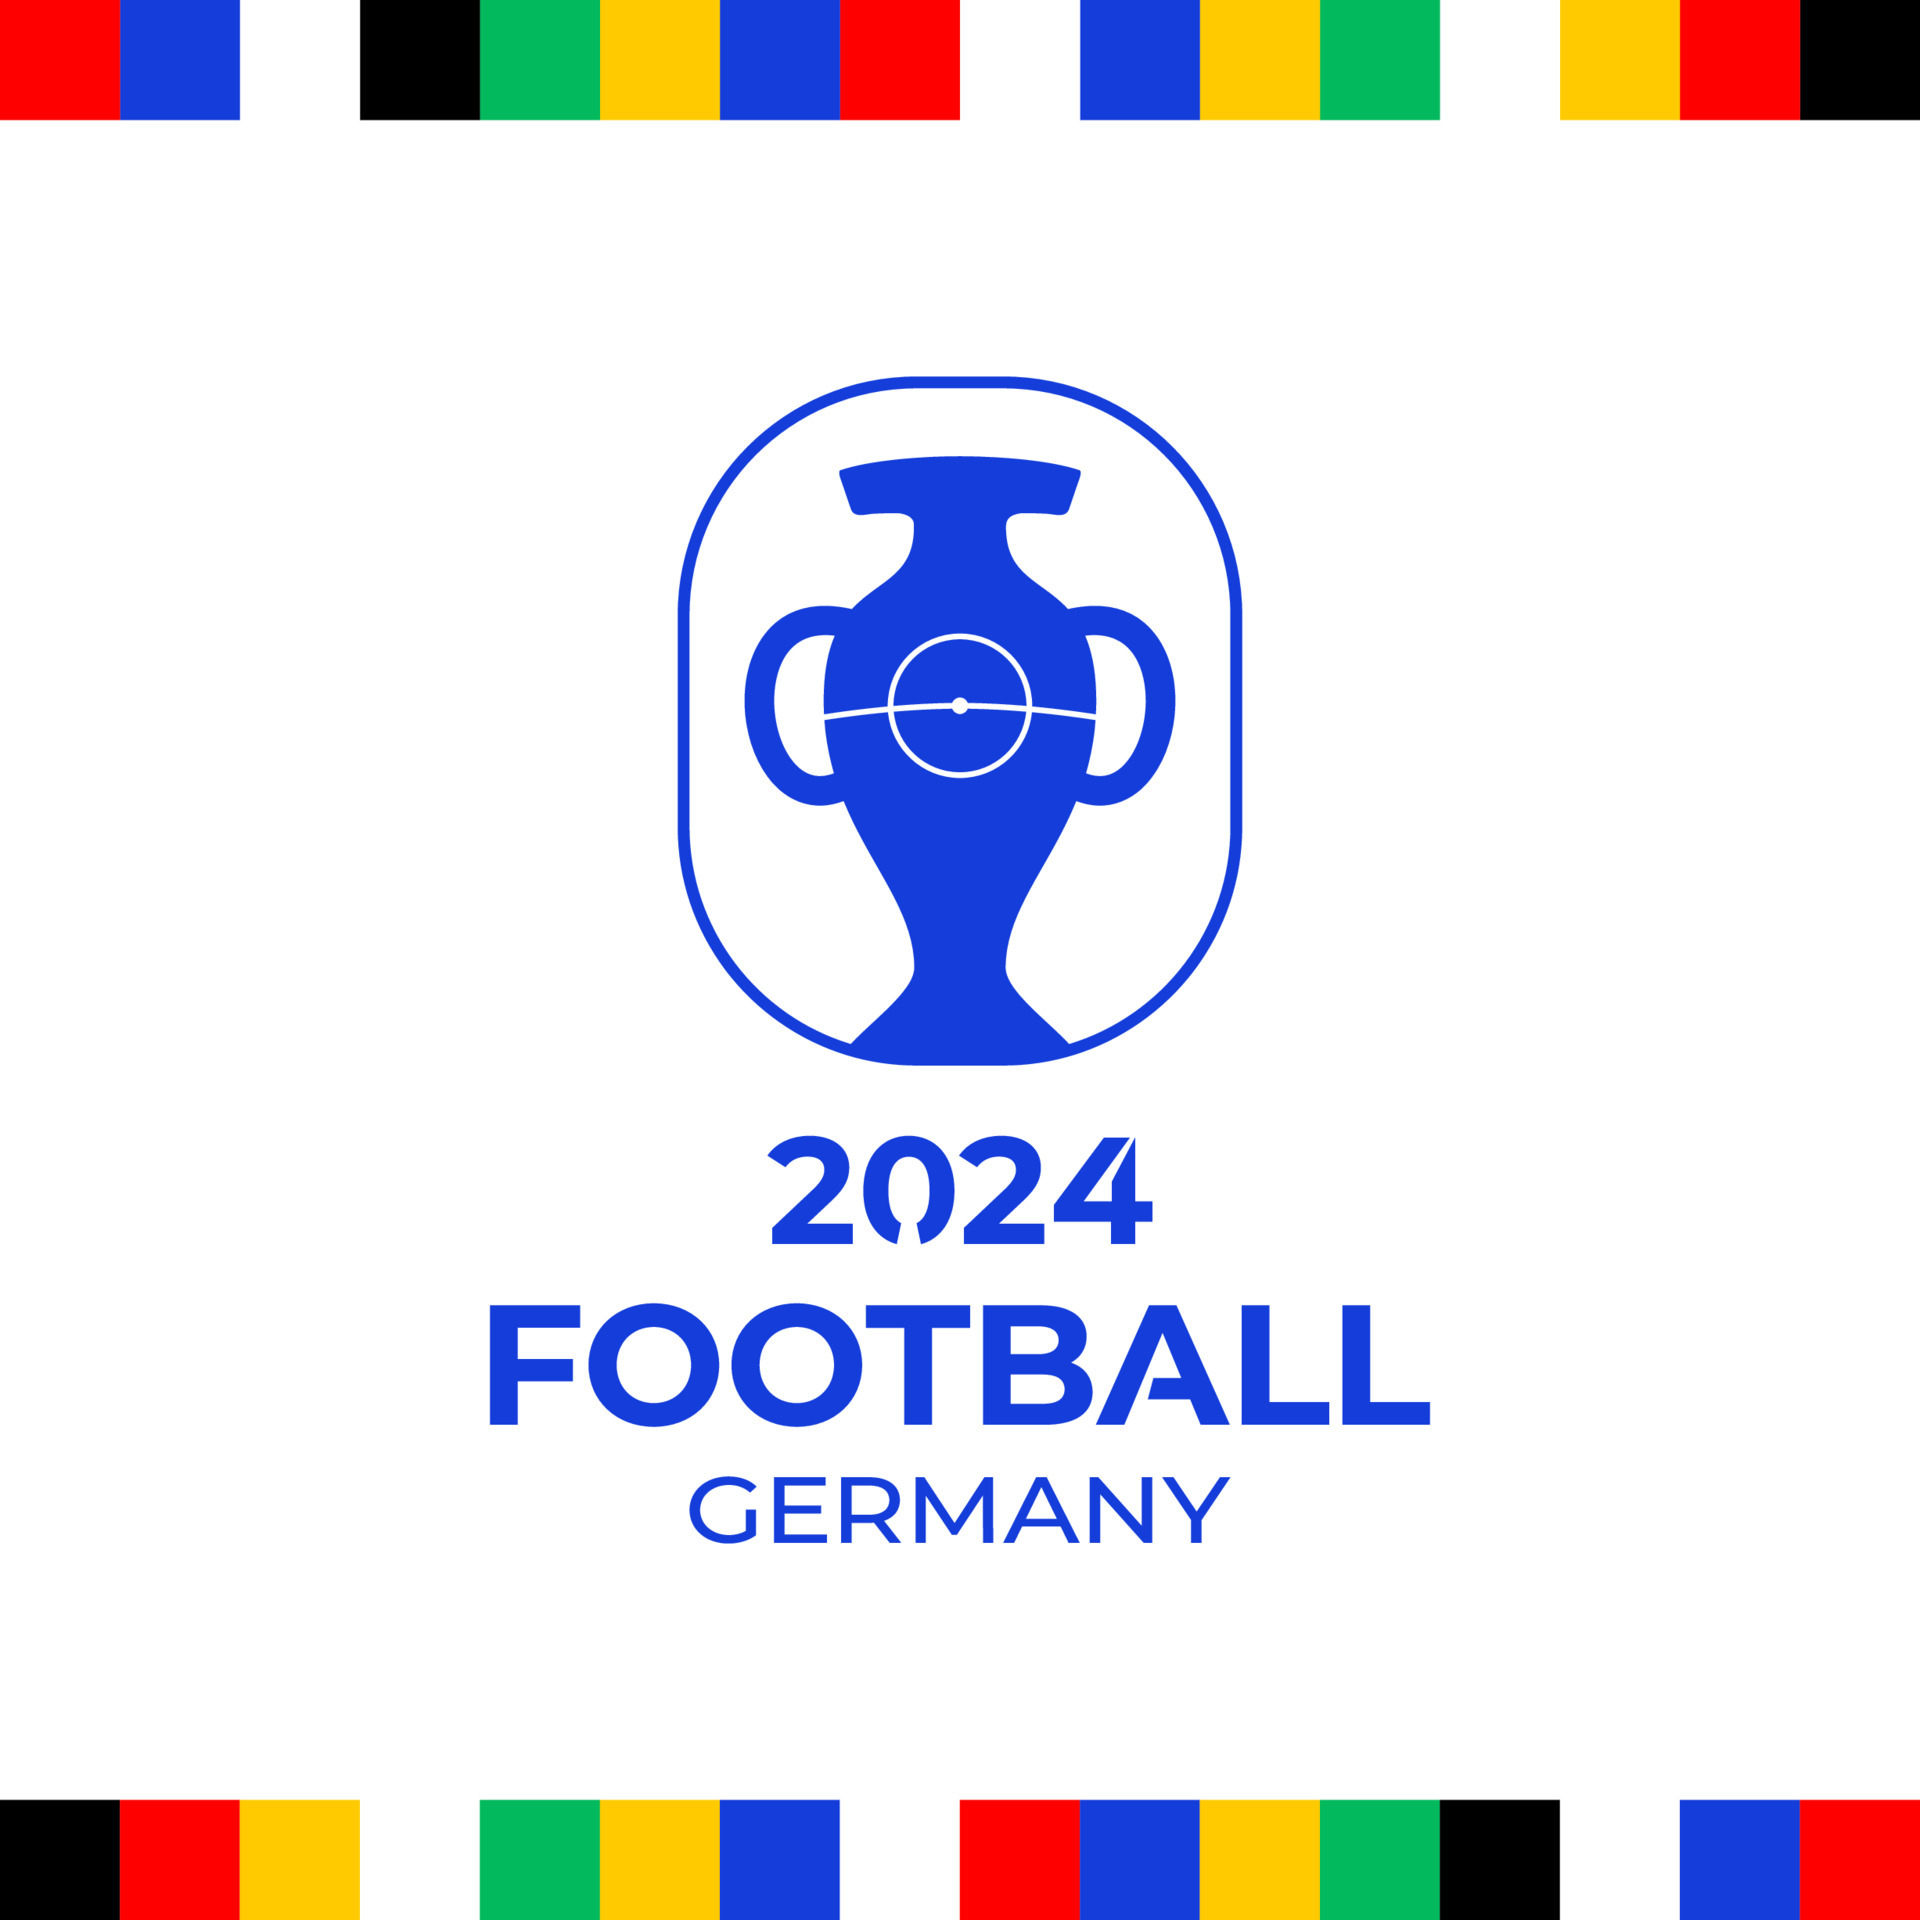 2024 Football Championship Logo Football Or Soccer Germany 2024 Logotype Emblem On Not Official White Background With Country Flag Colourful Lines Sport Football Logo With Cup Trophy Vector 